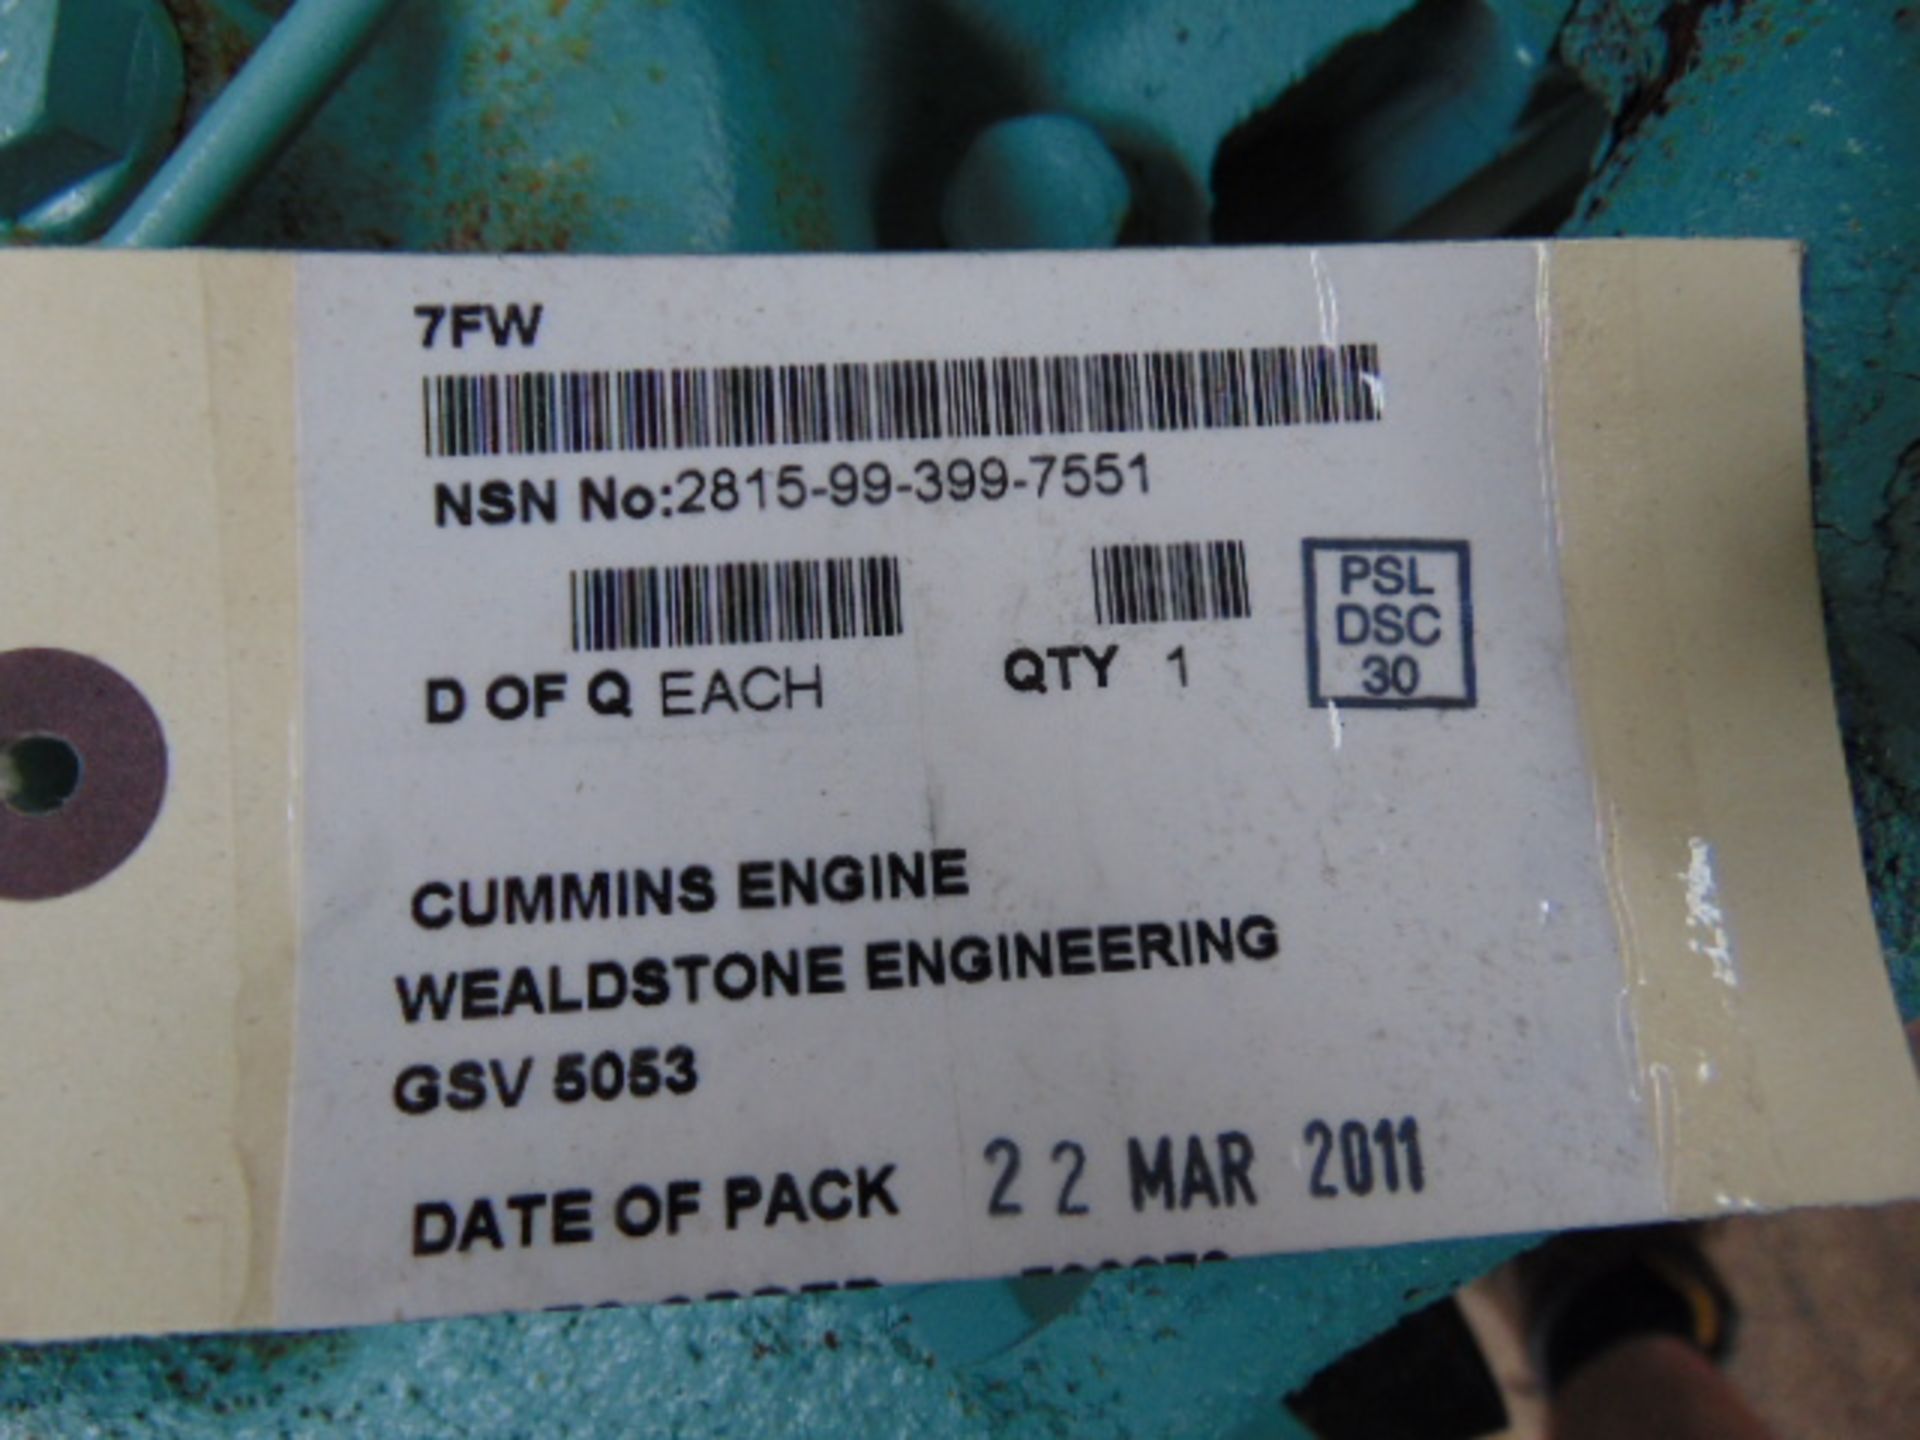 A1 Reconditioned DAF Cummins 310 Diesel Engine - Image 7 of 7